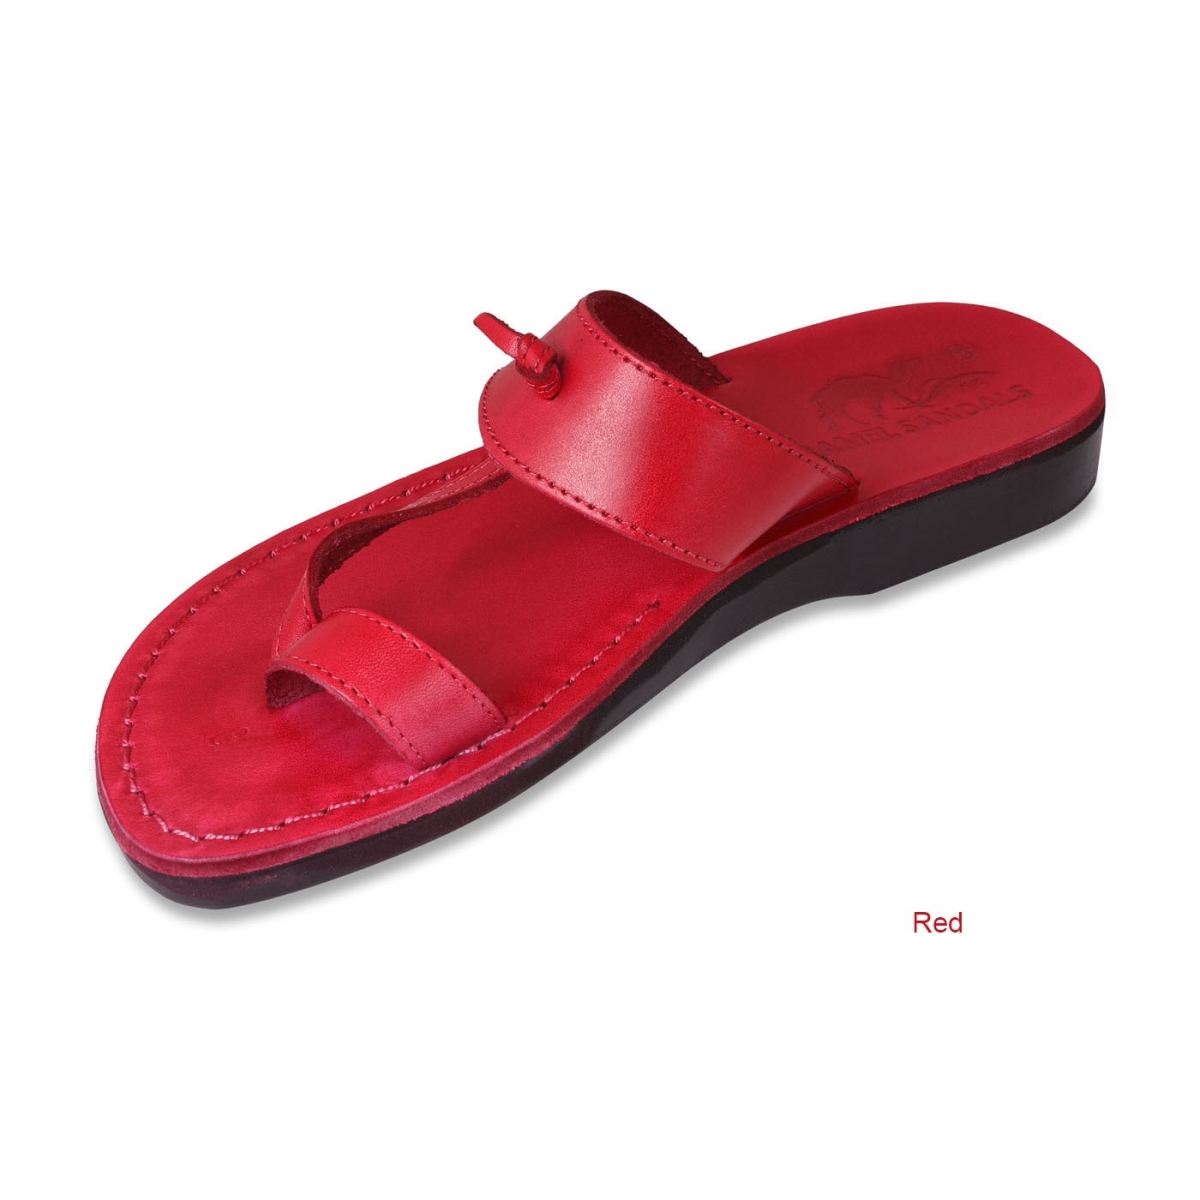 Oasis Handmade Leather Sandals for Children and Adults (Choice of Colors) - 4